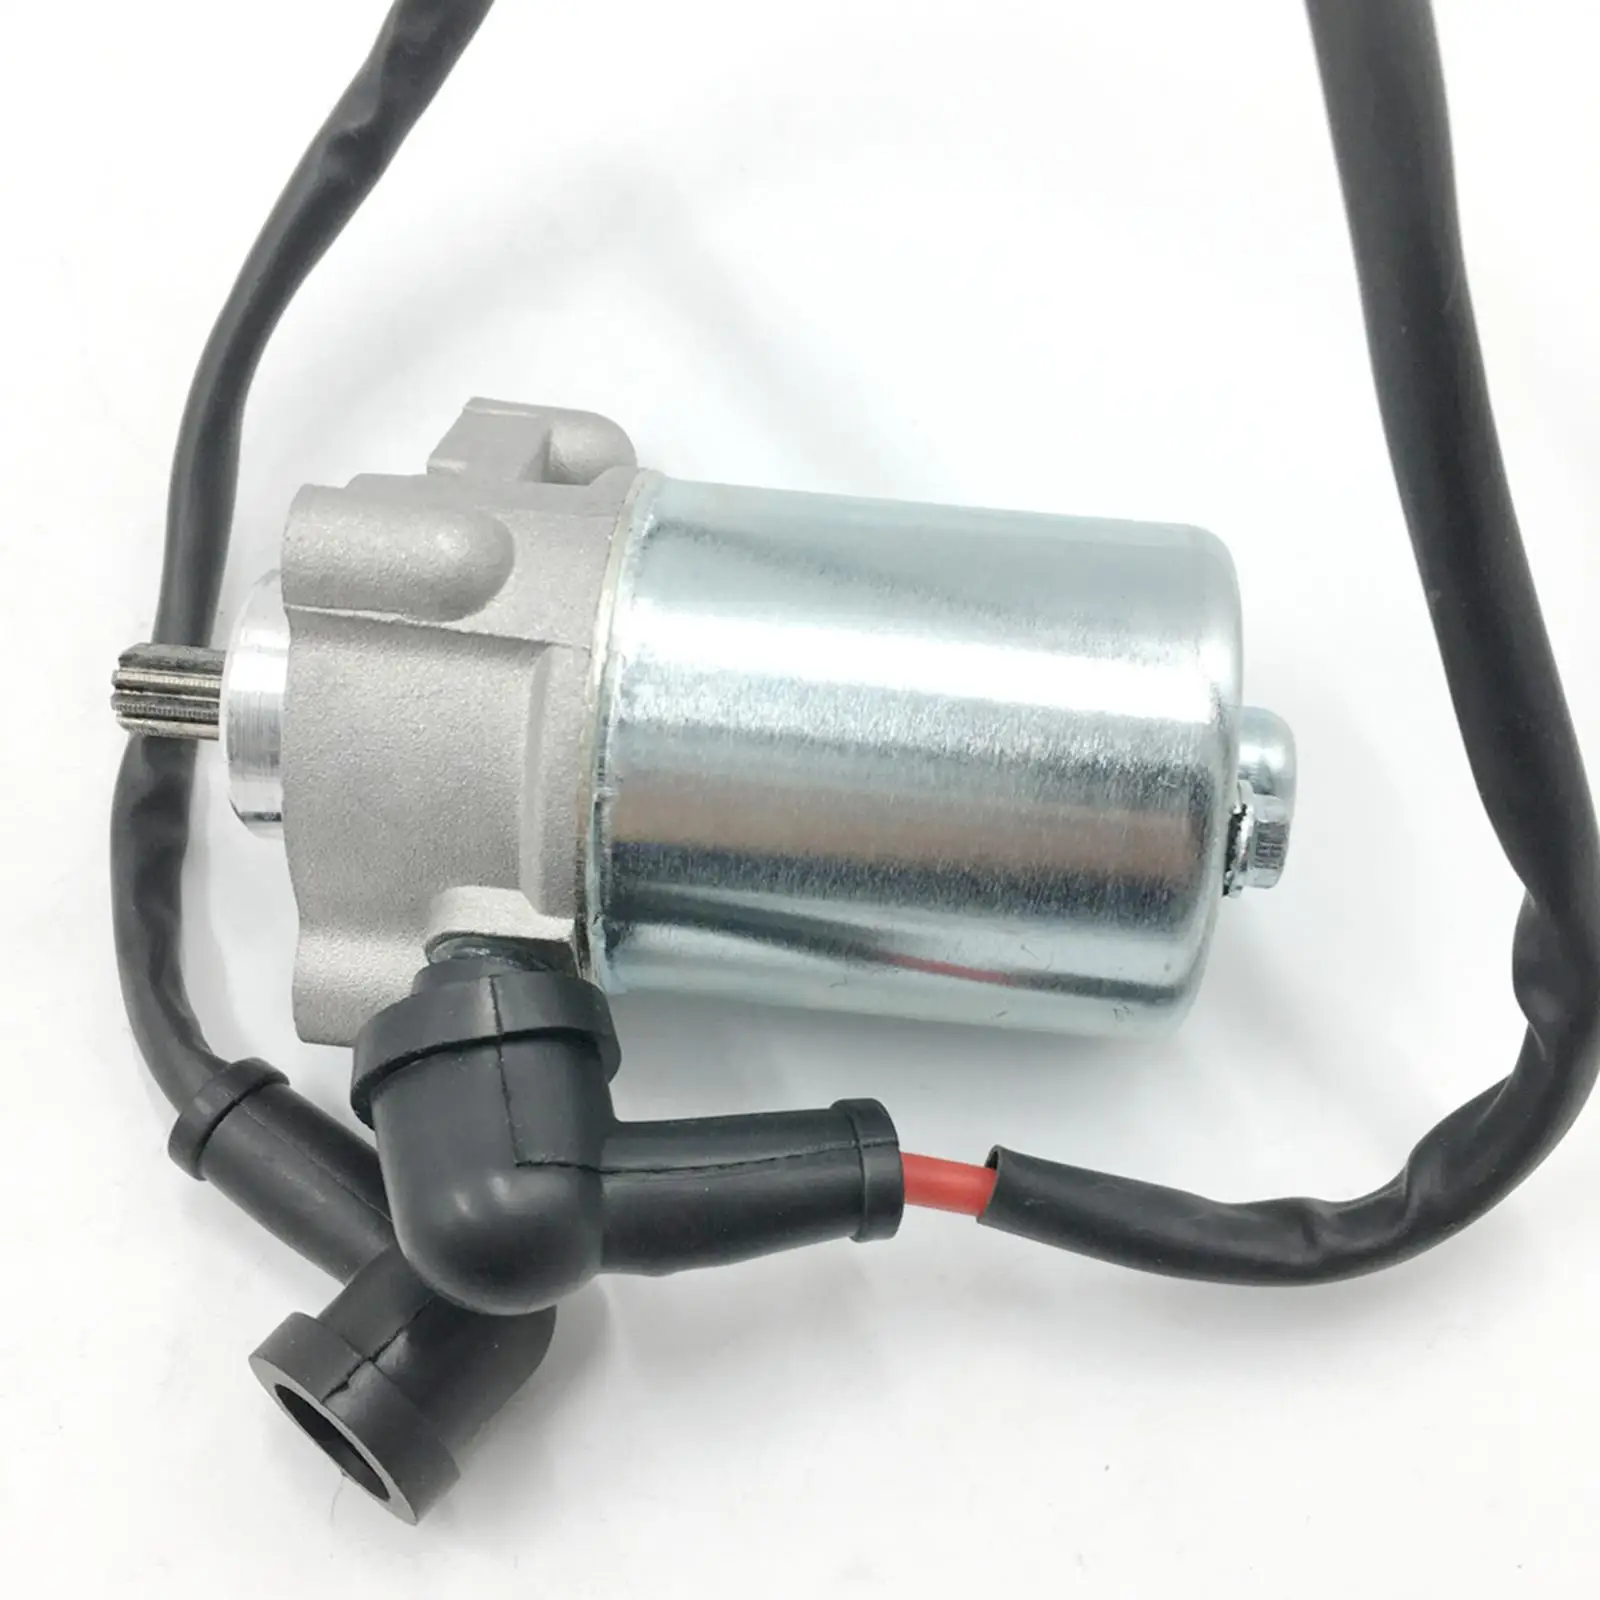 Motorcycle Starter Motor Spare Parts for Yamaha Tdr125 High Quality